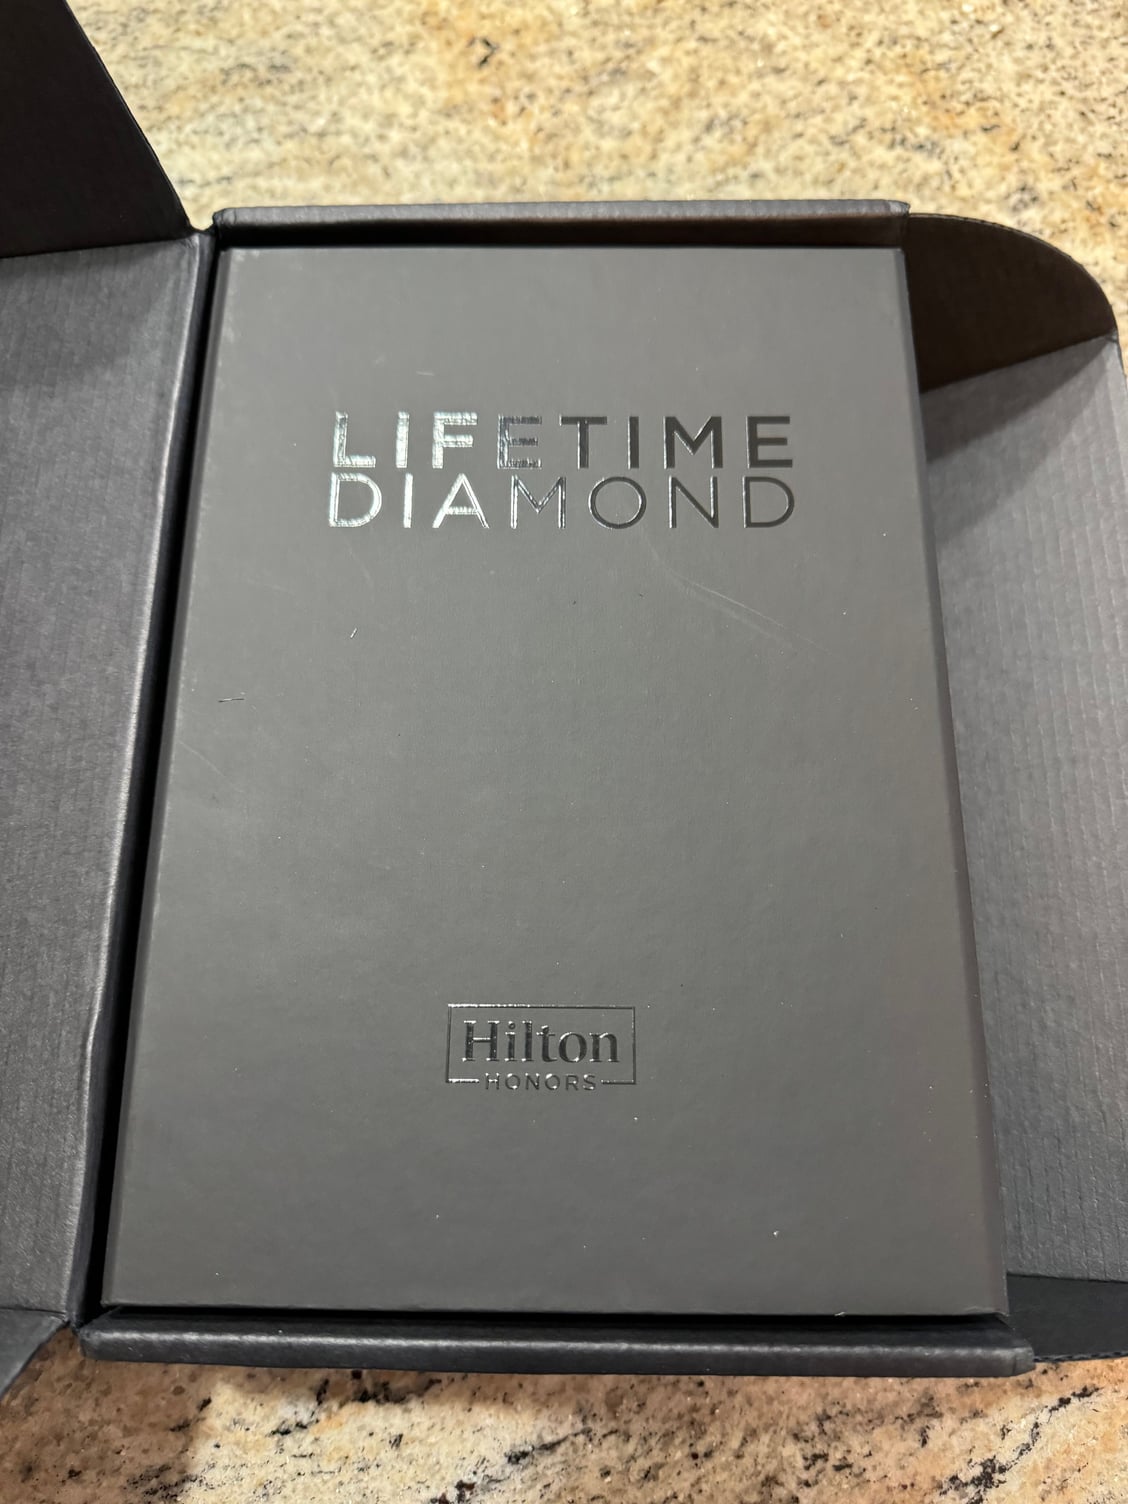 Get Hilton Diamond Status After 9 Nights With Status Match (Good Through  March 2023)